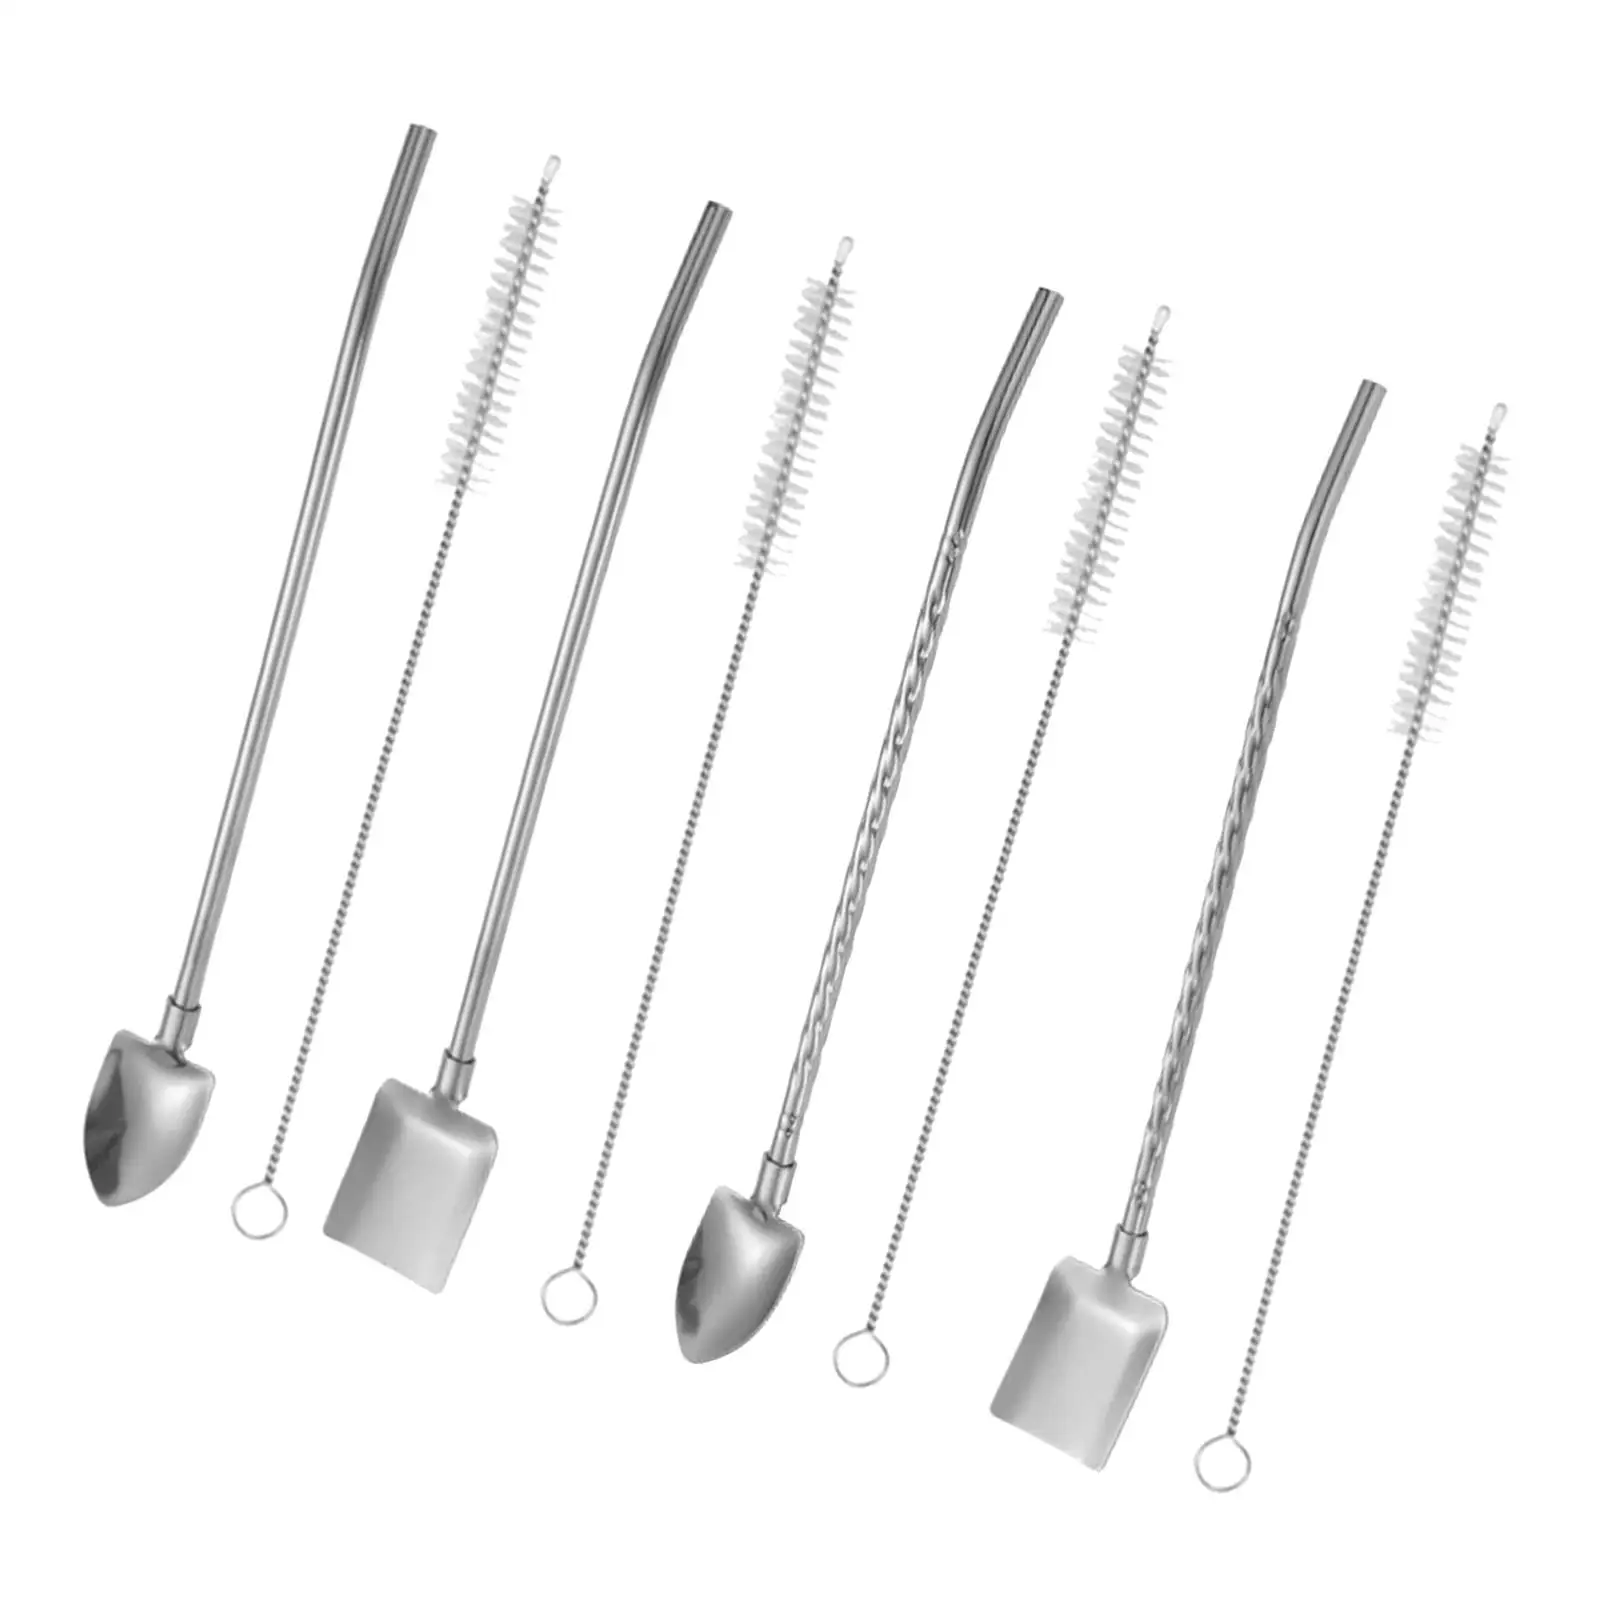 Stainless Steel Spoon Drinking Stirring Spoons Straw for Tea Juice Coffee Ice Cream